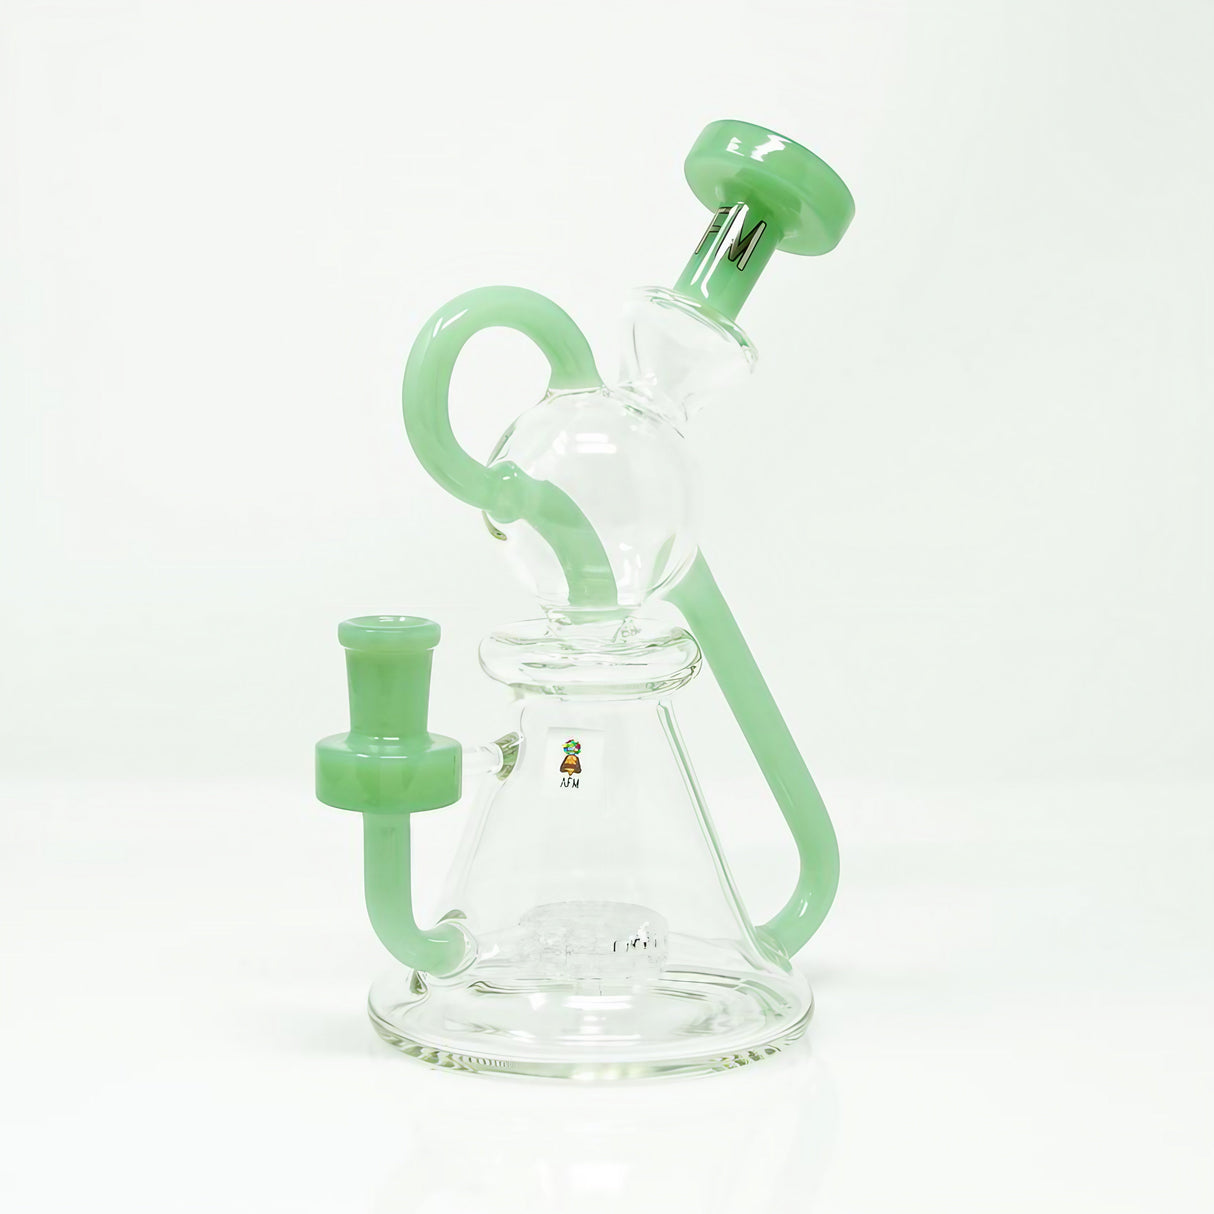 AFM 8" Unicorn Recycler Dab Rig with Green Accents and Slit-Diffuser, Front View